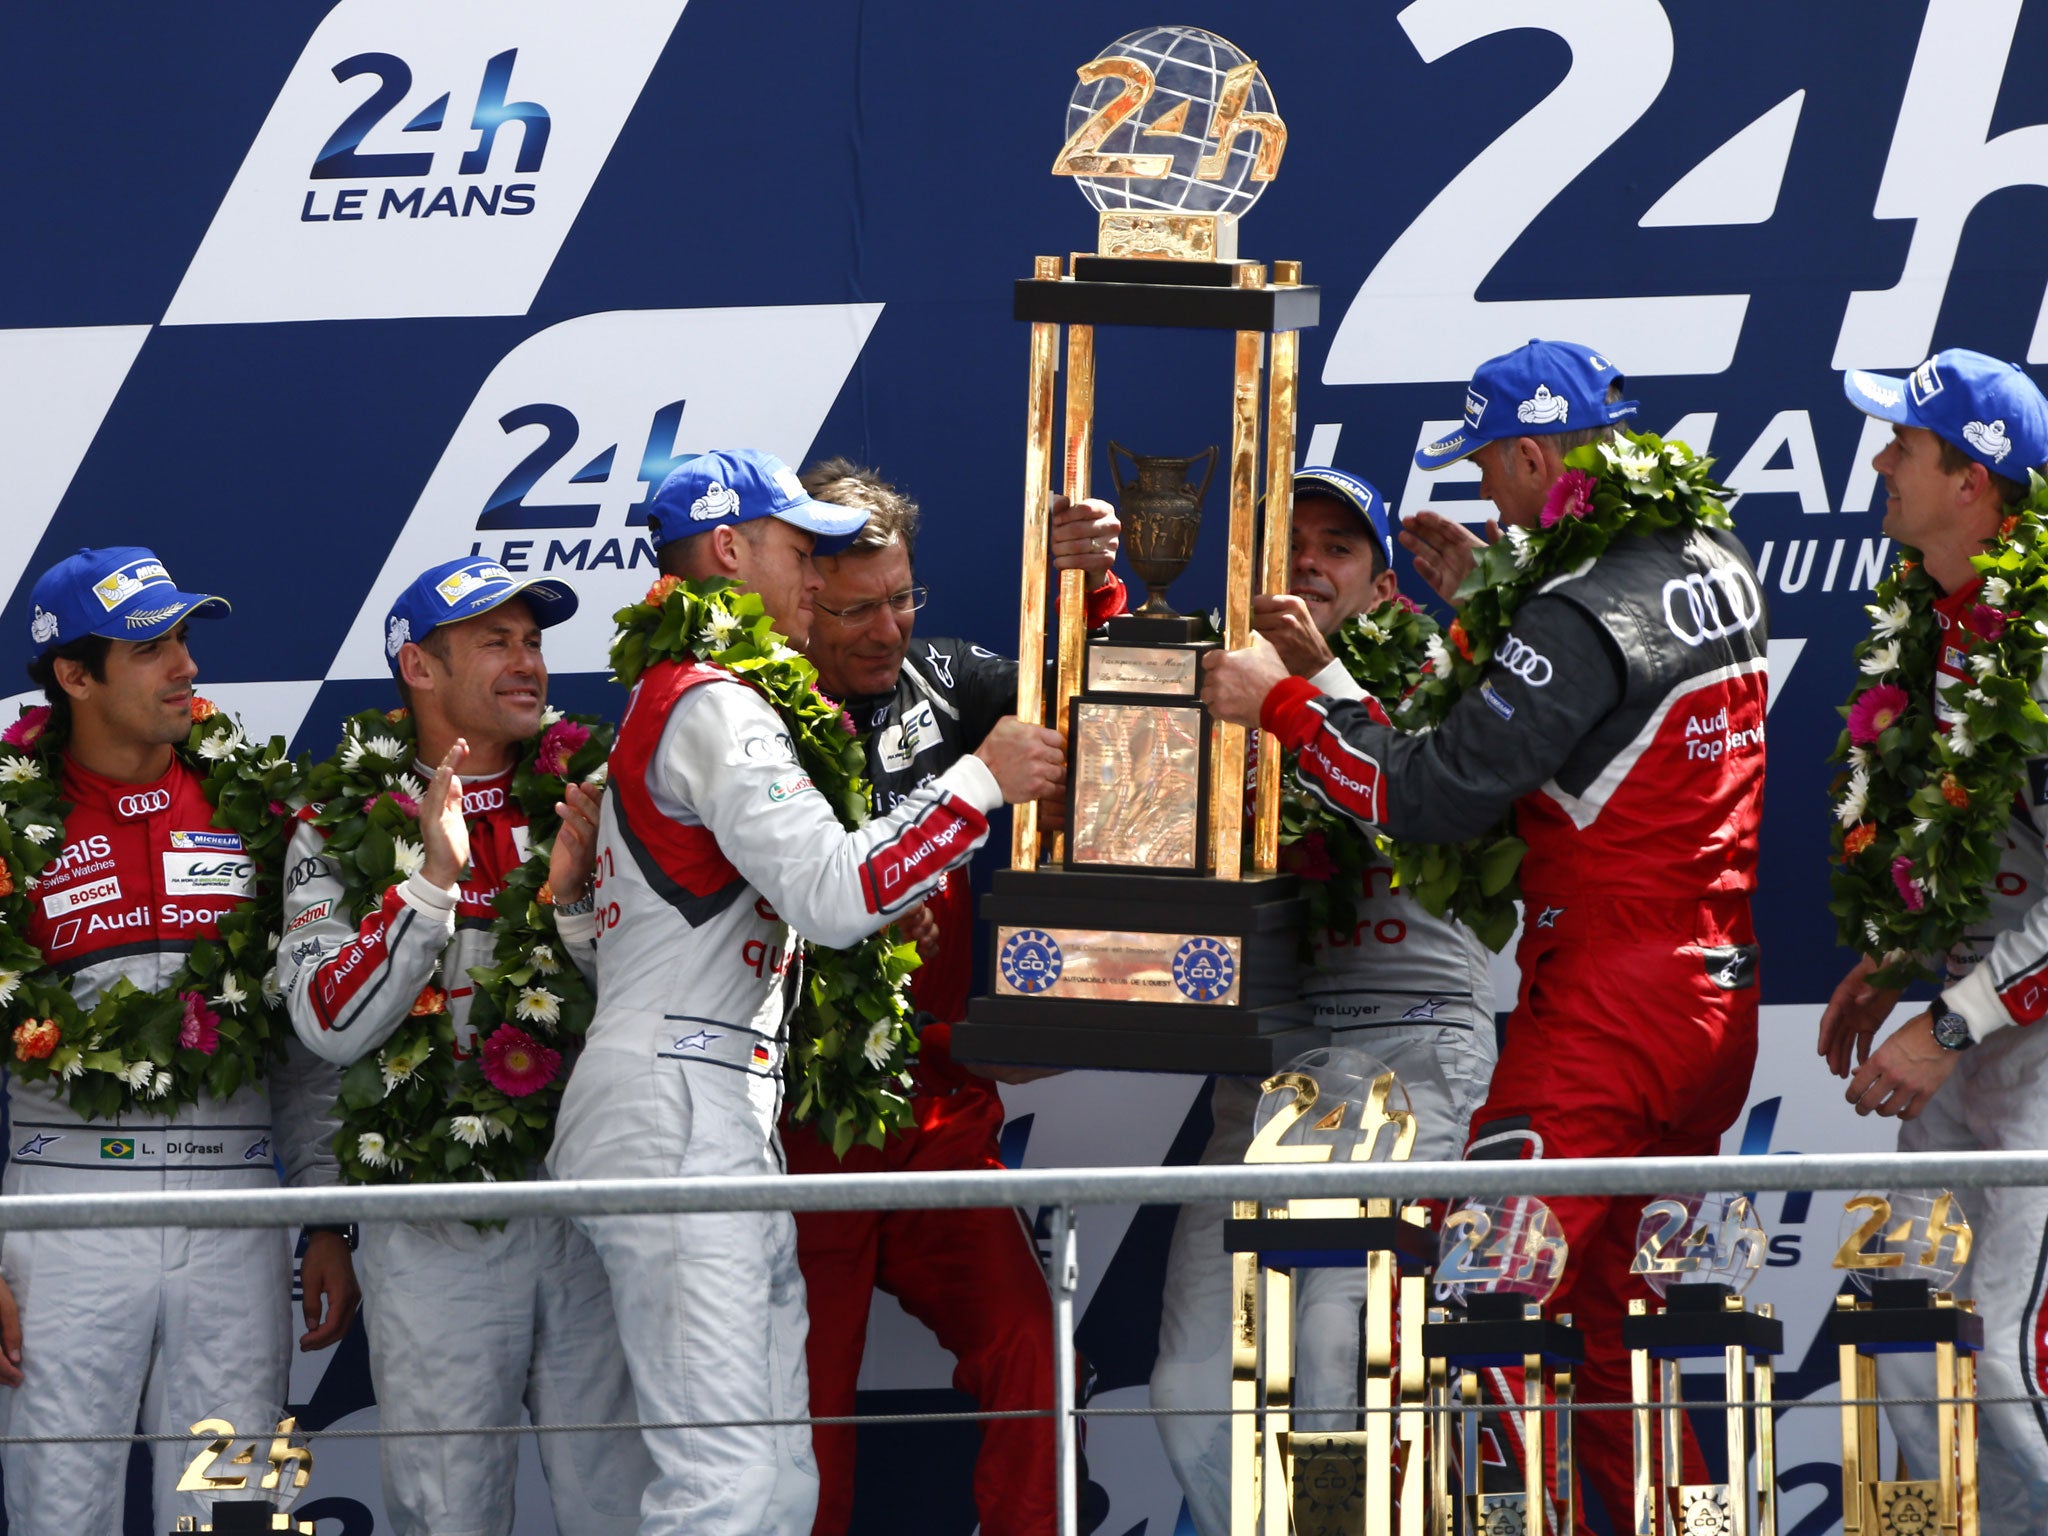 The Audi team celebrate after winning their 13th Le Mans 24 hour title